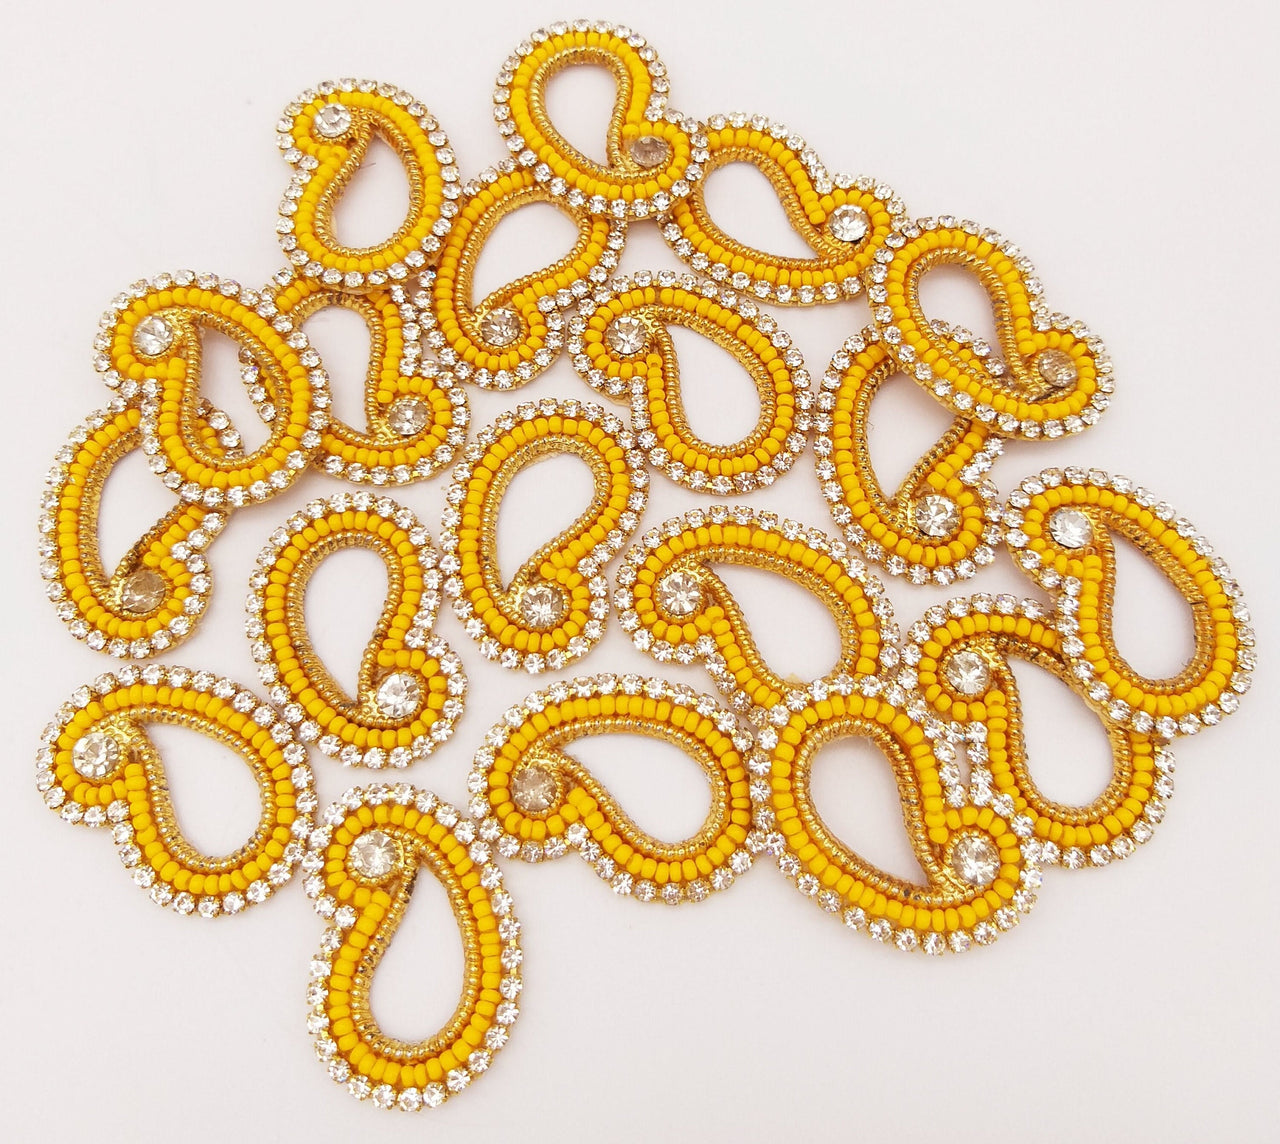 5 Paisley Appliques In Yellow Seed Beads and Rhinestones, Gold Paisley Appliques, Beaded Applique